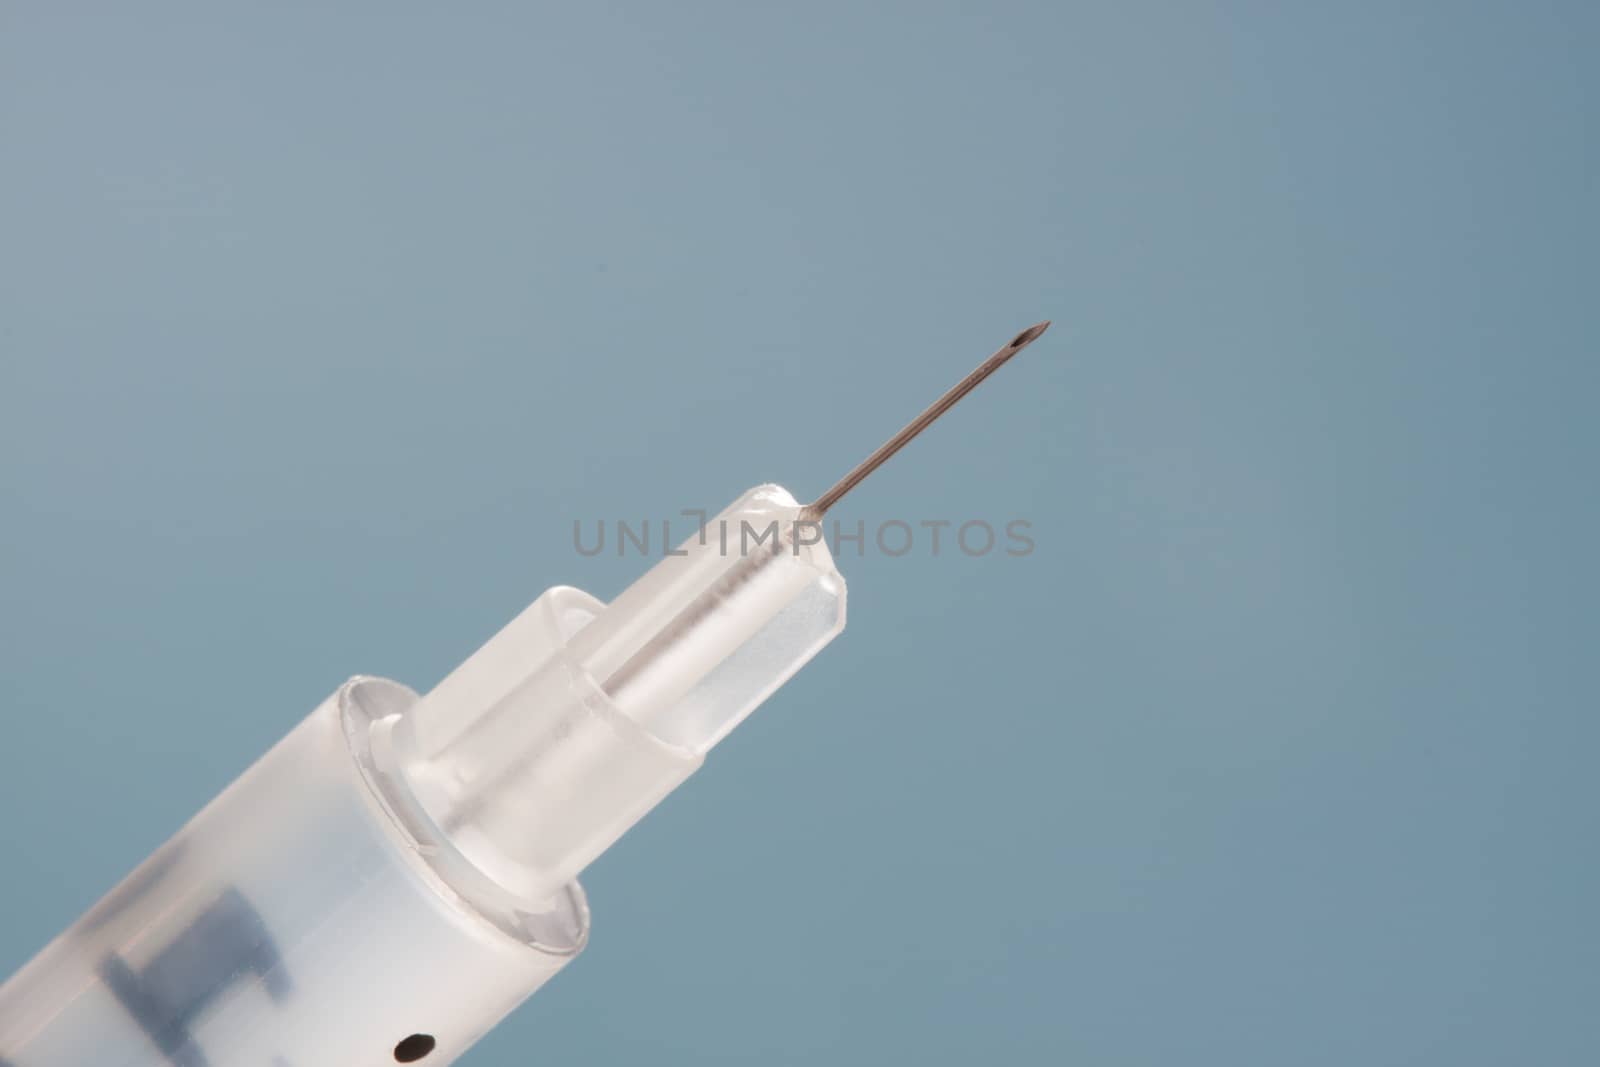 Closeup on medical subcutaneous needle shot for insulin or other drugs